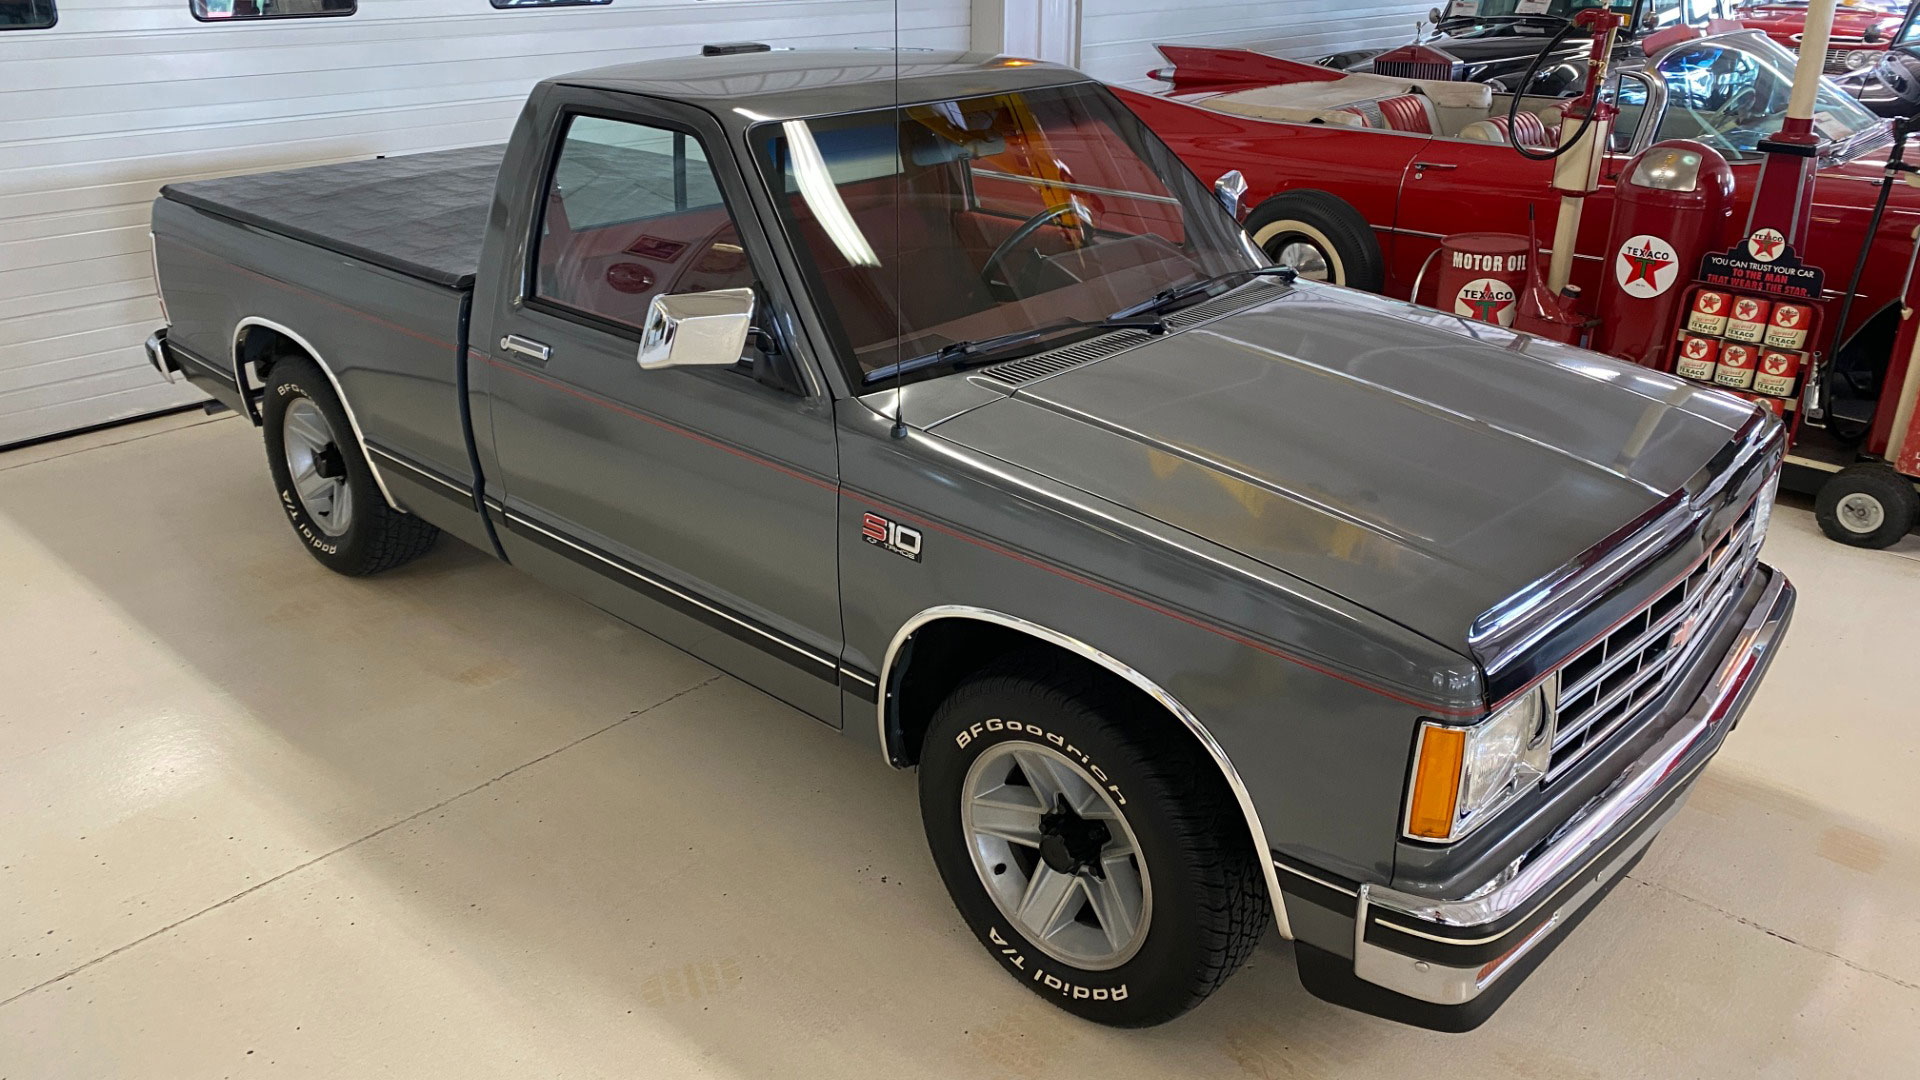 1988 Chevy S-10 Tahoe For Sale: Video